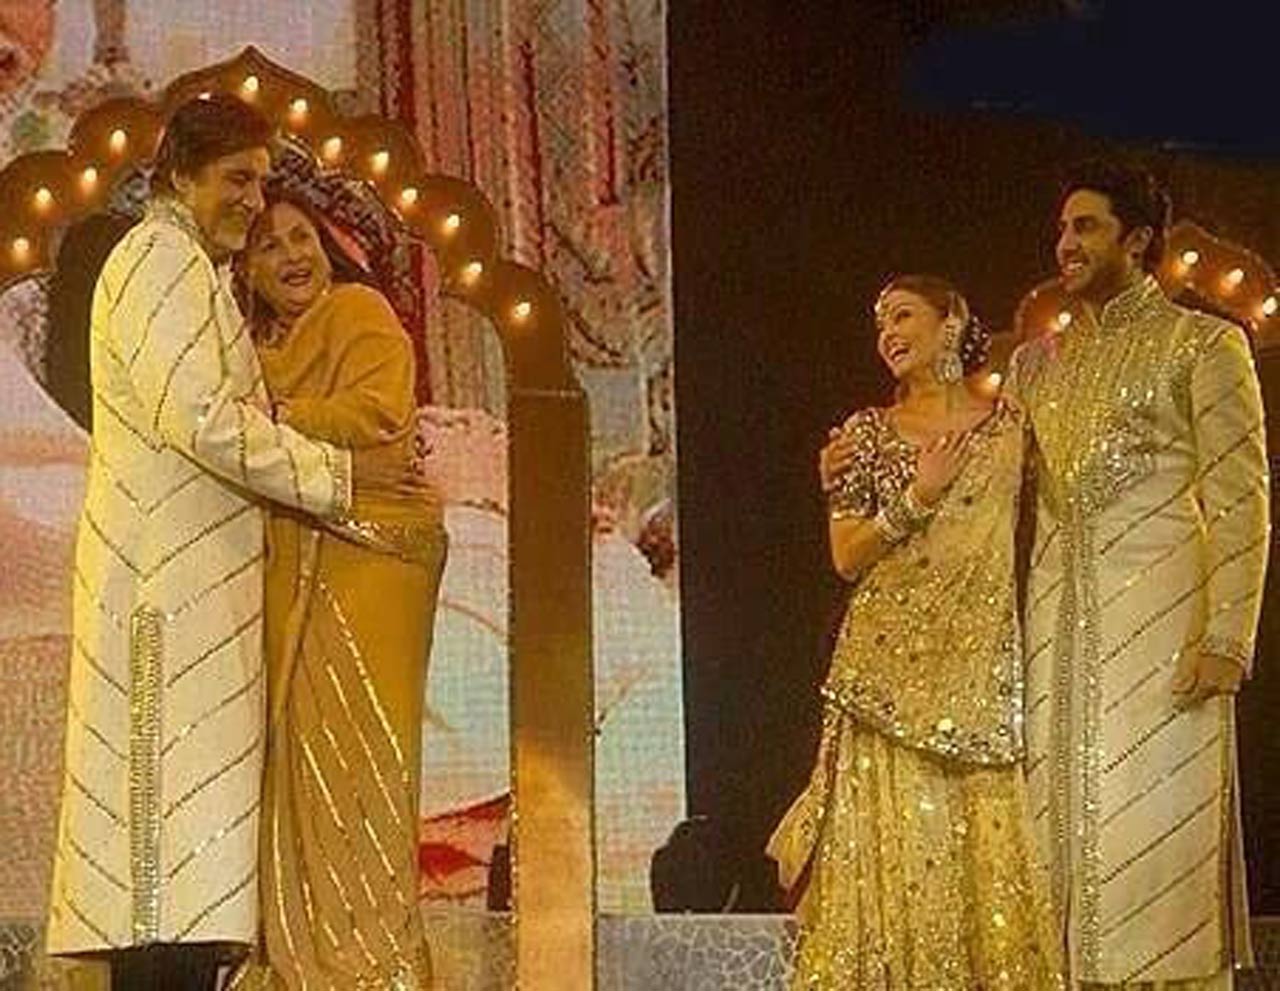 Amitabh Bachchan and Jaya Bachchan celebrate 50 years of togetherness. They tied the knot on June 3, 1973. Their son Abhishek Bachchan has been sharing vintage pictures to wish them every year. This is a picture that has the entire Bachchan family in one frame and Abhishek Bachchan writes- 